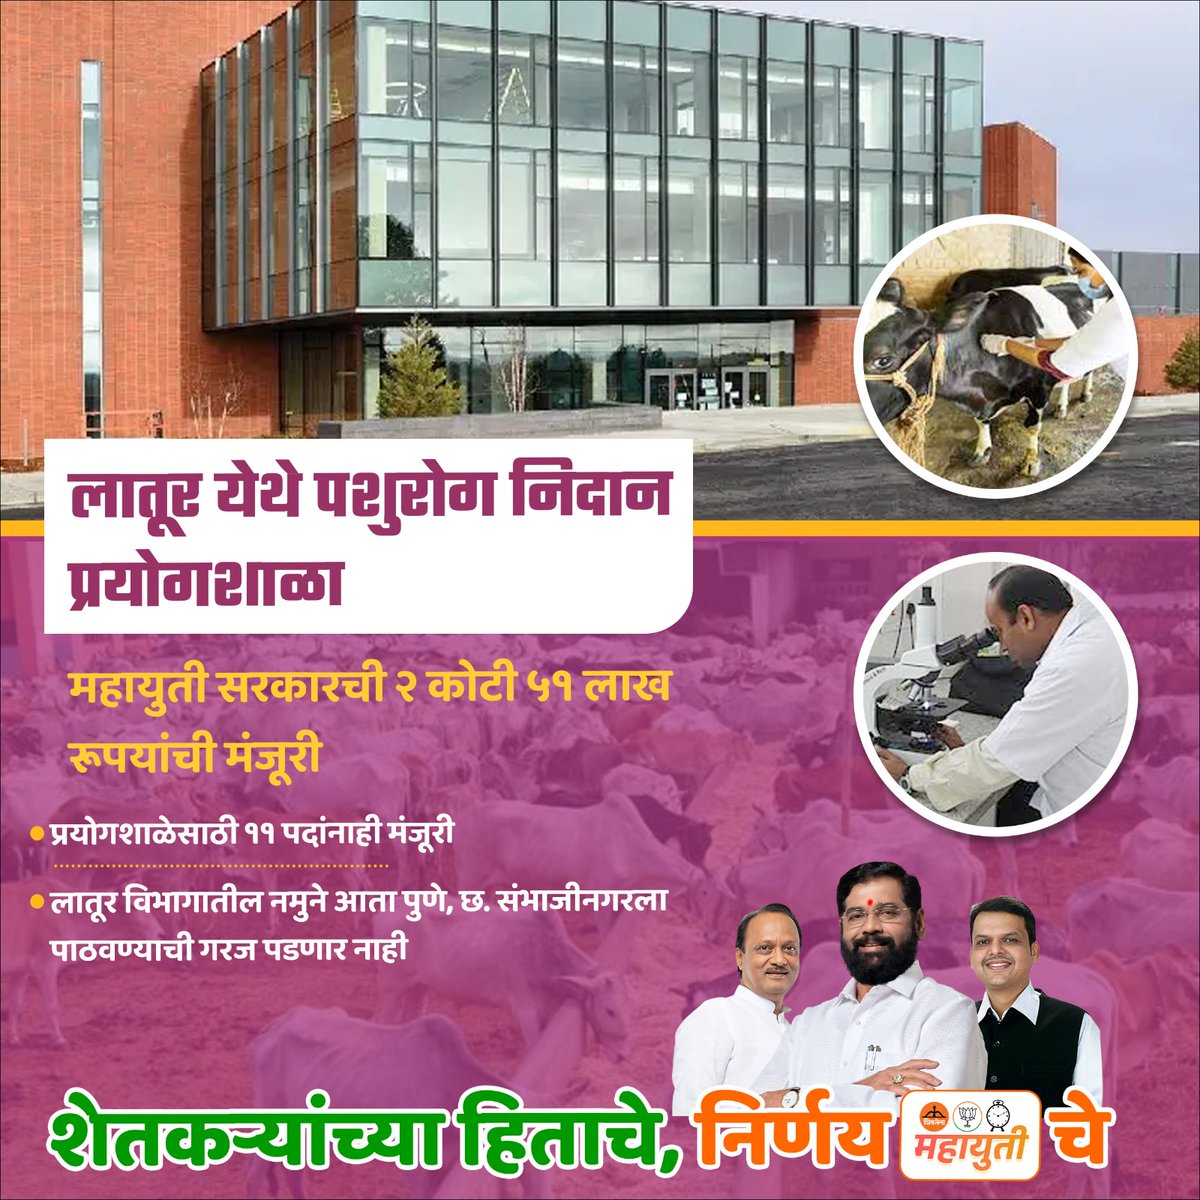 Exciting news for the agricultural sector in Latur! The Mahayuti government, under the leadership of CM Eknath Shinde, sanctions 2 crore 51 lakh rupees for the establishment of a Veterinary Diagnostic Laboratory.